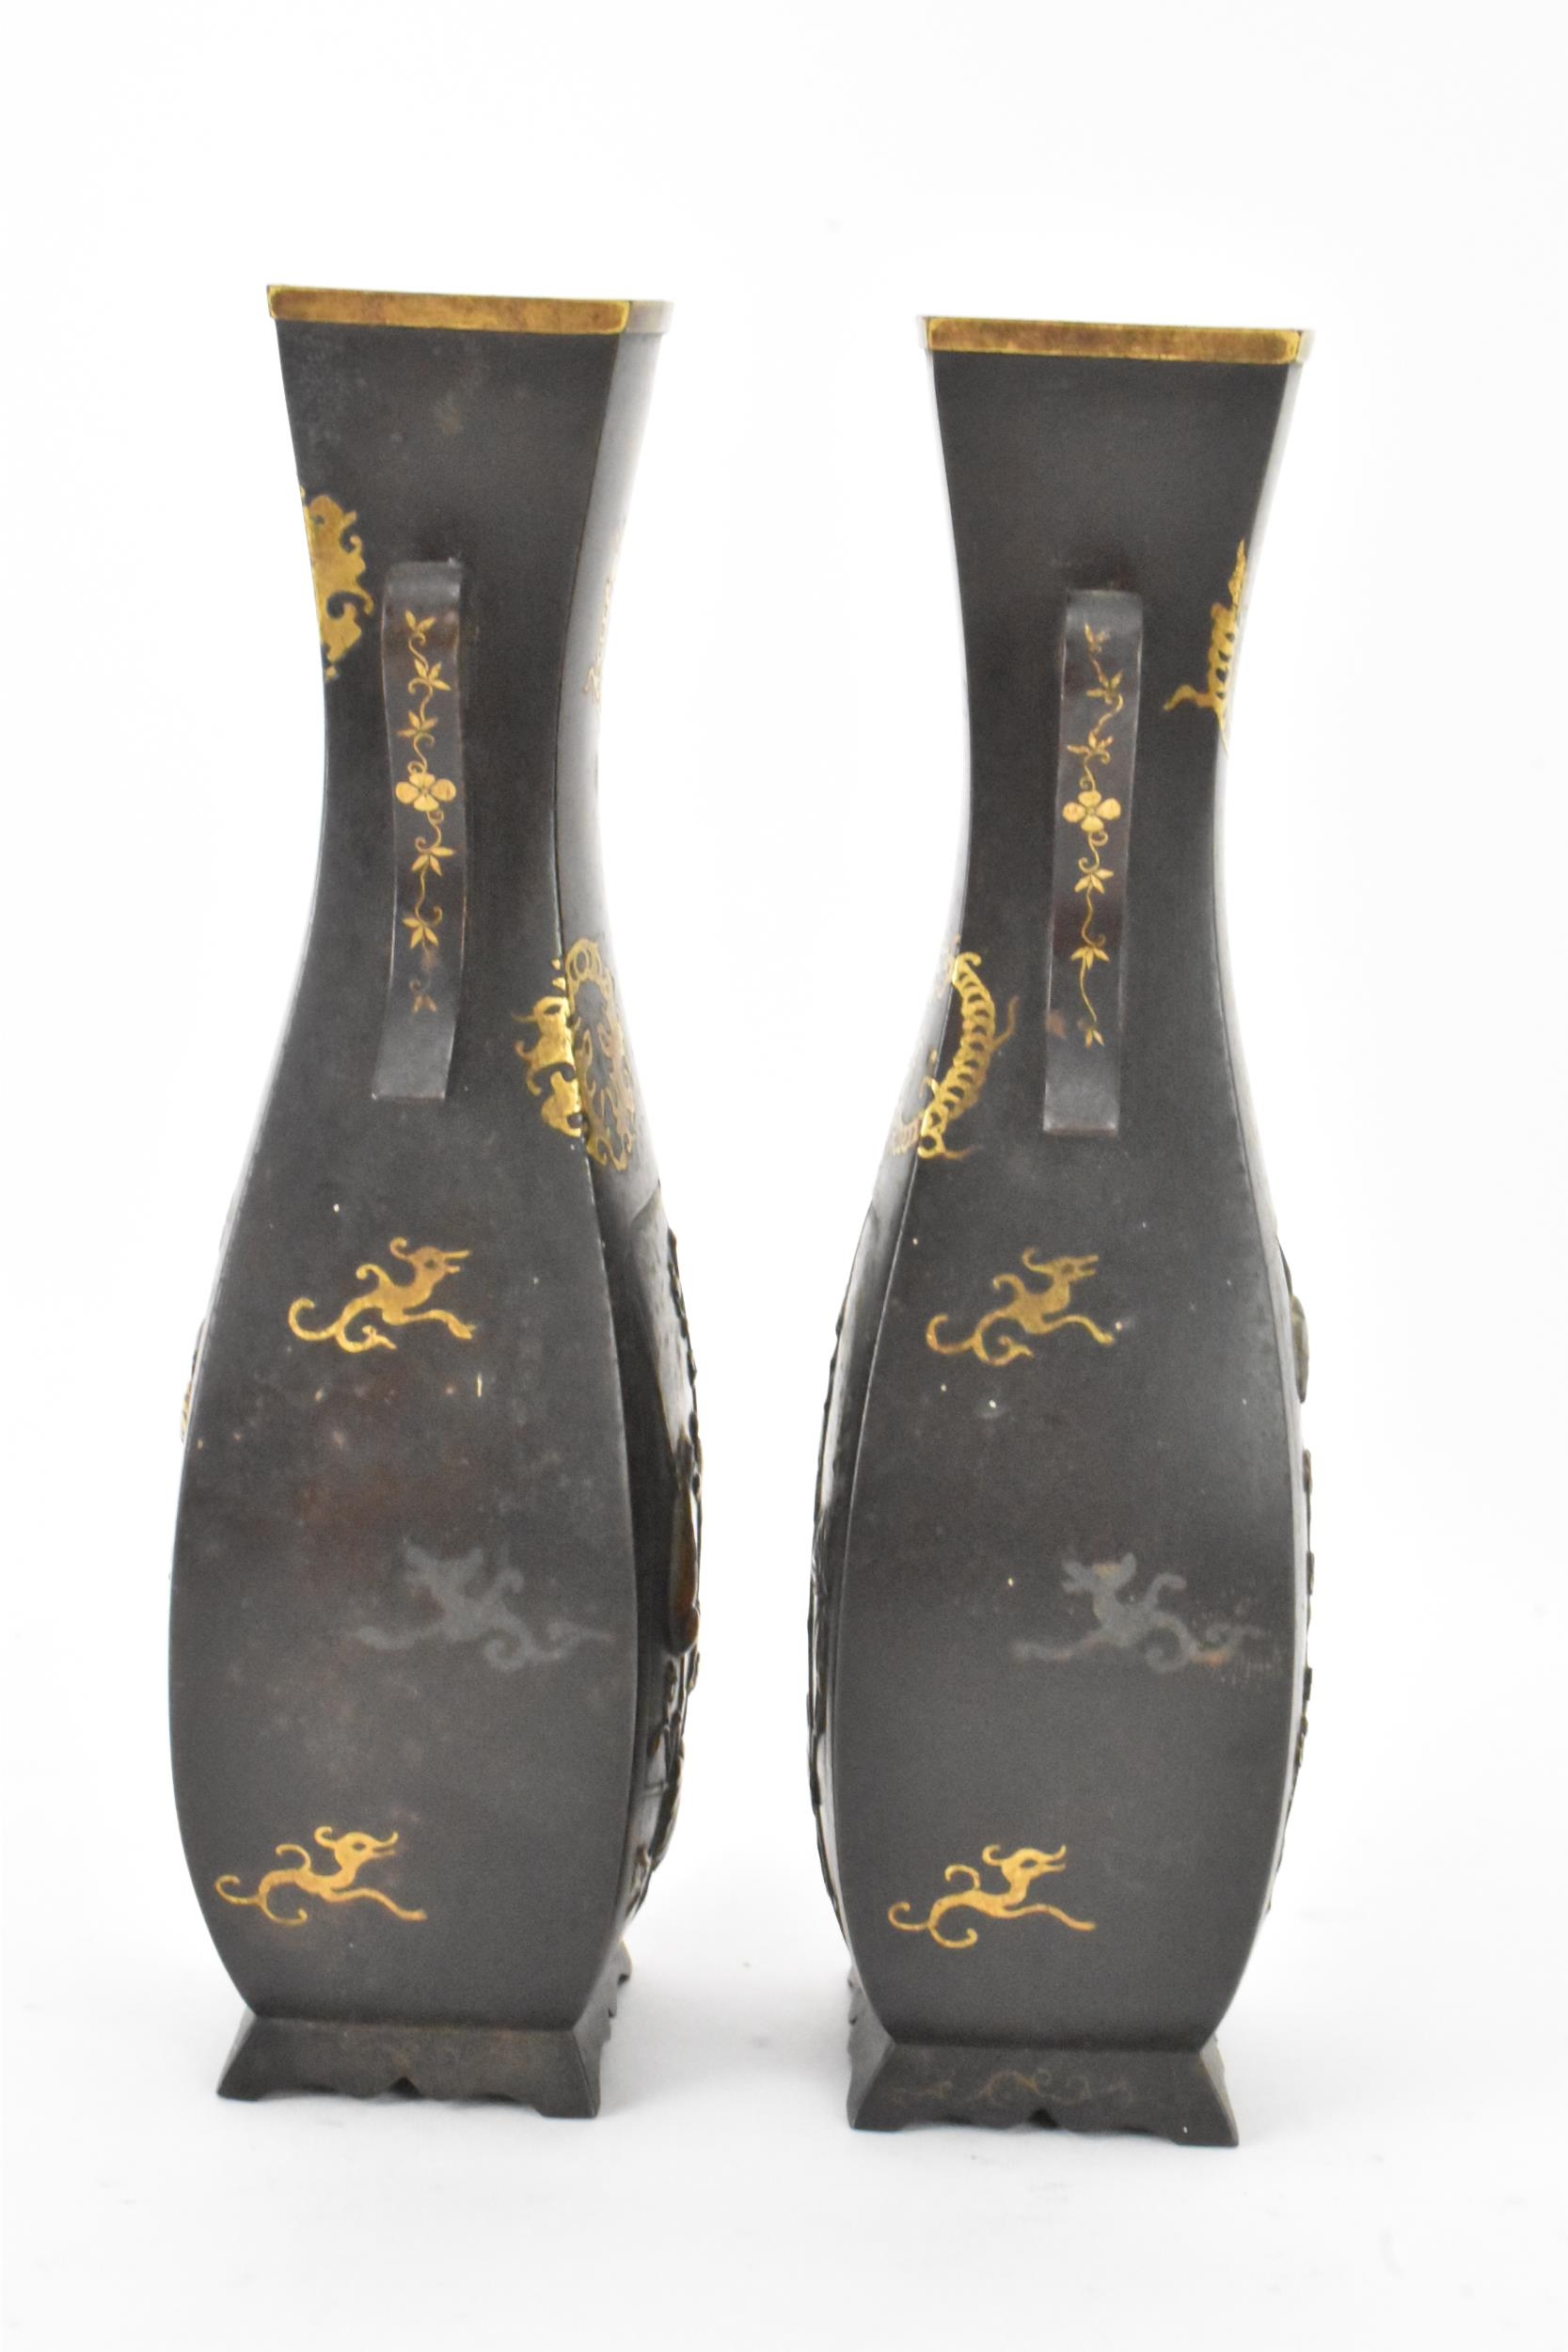 A pair of Japanese Meiji period iron vases, decorated with panels depicting birds and flowers in - Image 4 of 6